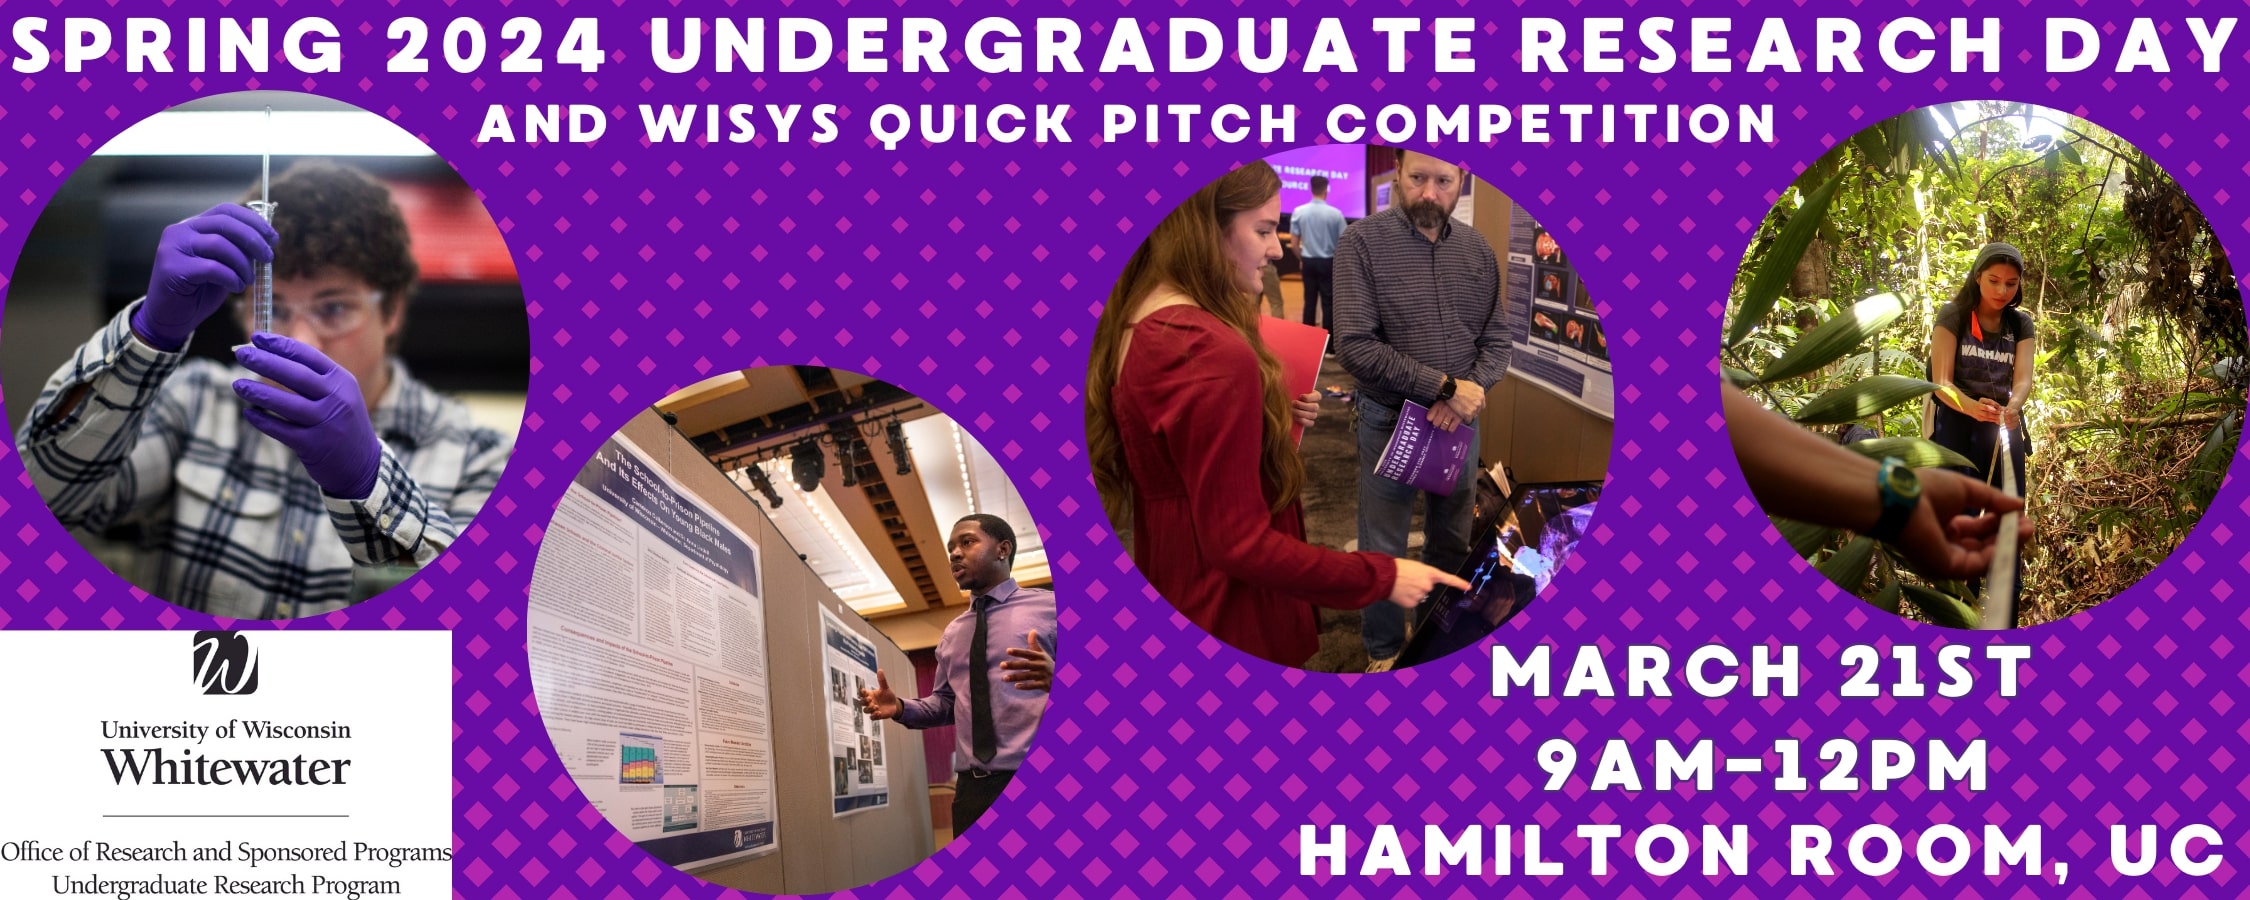 Spring 2024 Undergraduate Research Day on March 21st 9am at 12pm in the Hamilton Room - UC